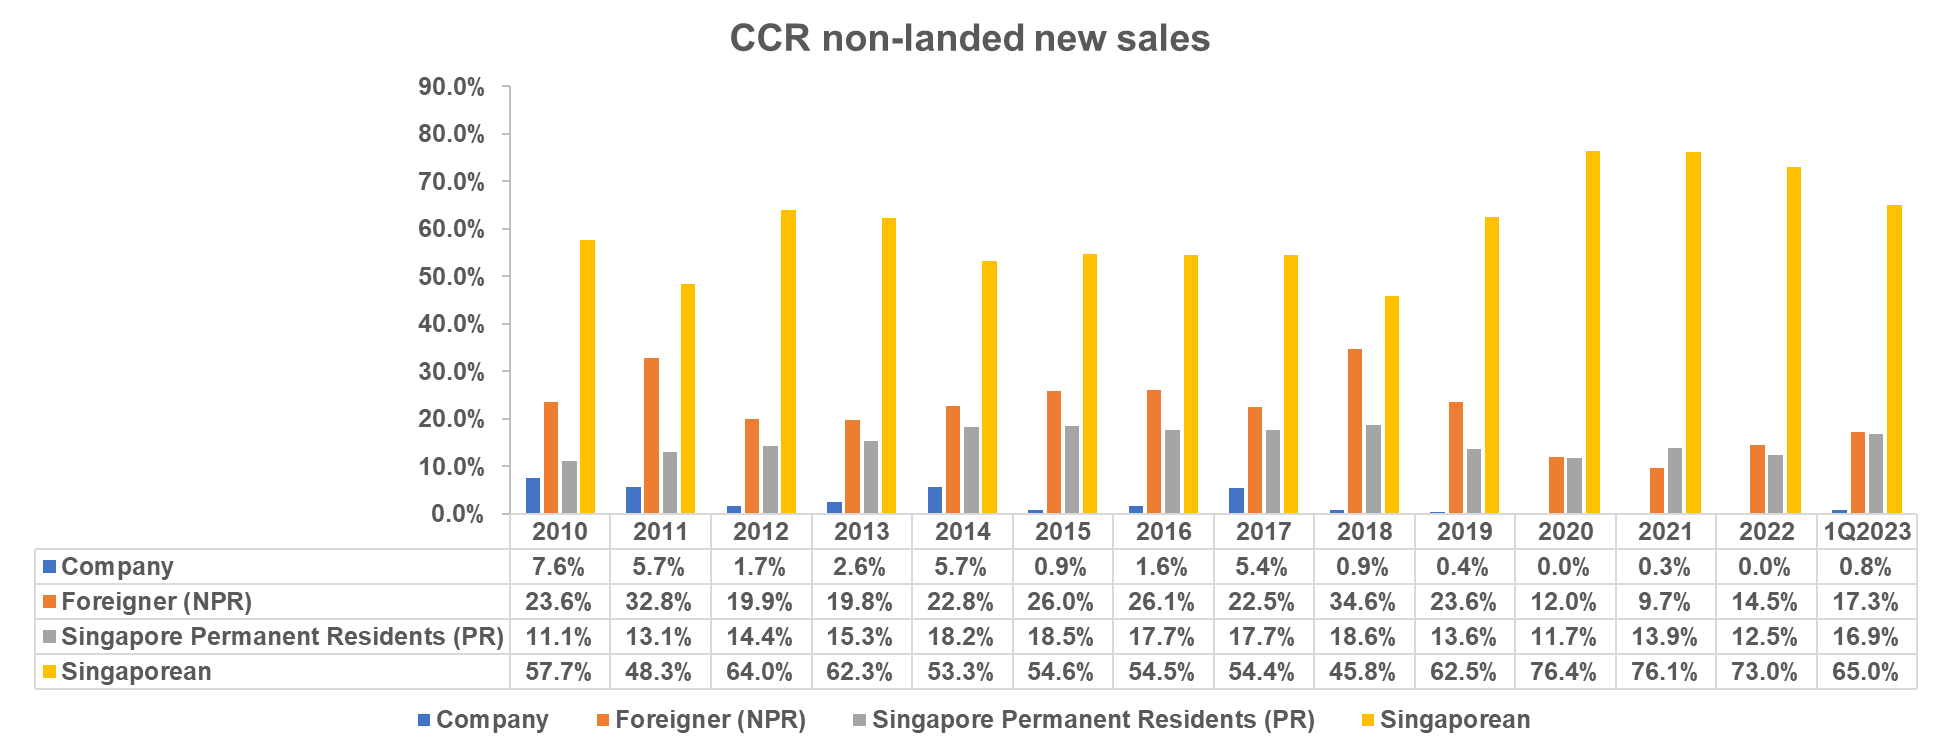 CCR non-landed new sales nationality breakdown (2010 to 2023)